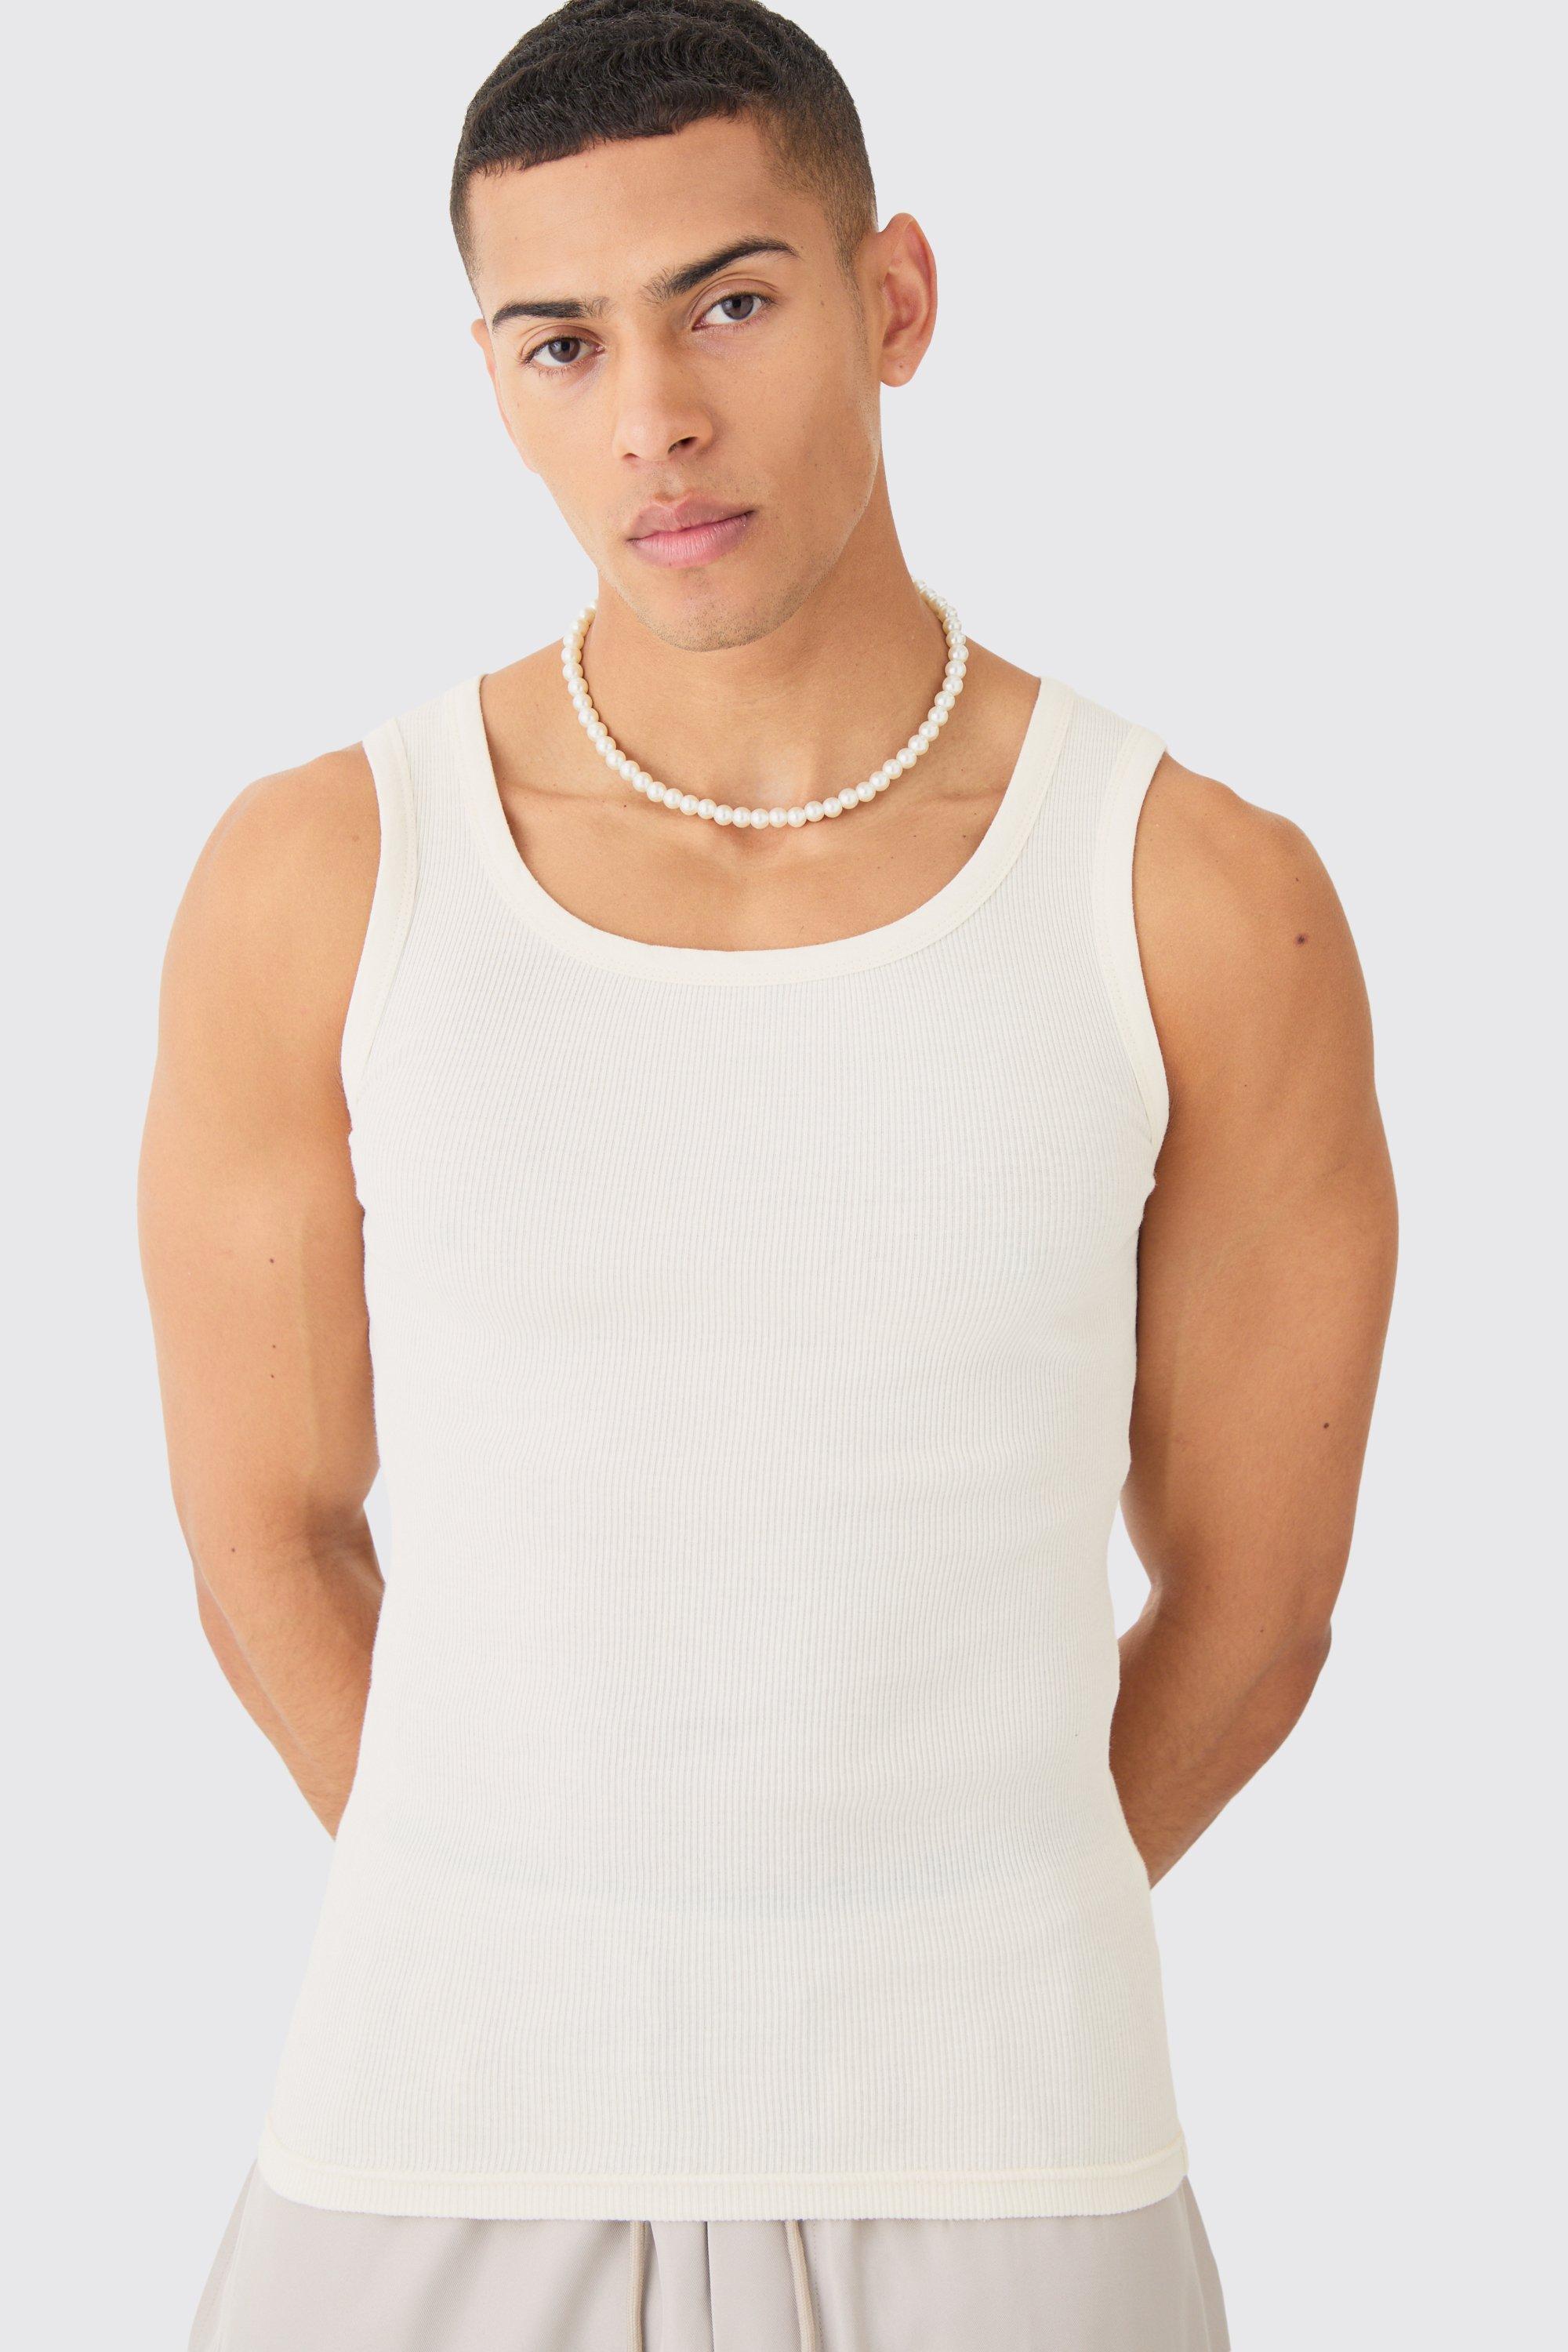 Image of Ribbed Muscle Fit Vest, Cream